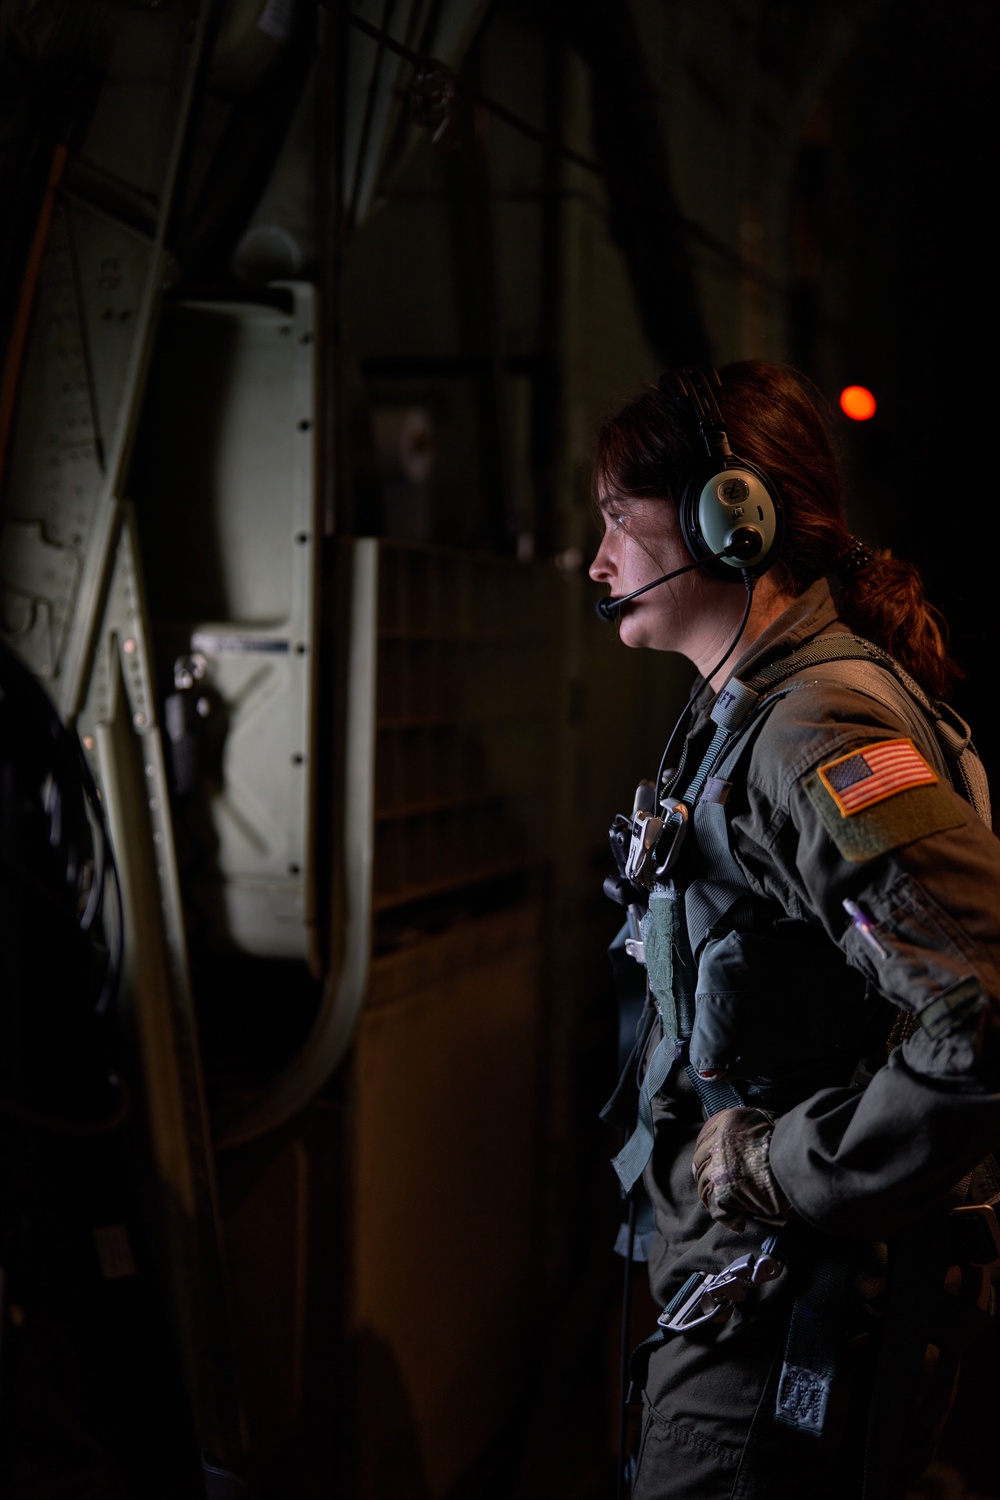 US Air Force, Japan Maritime Self-Defense Force fly together